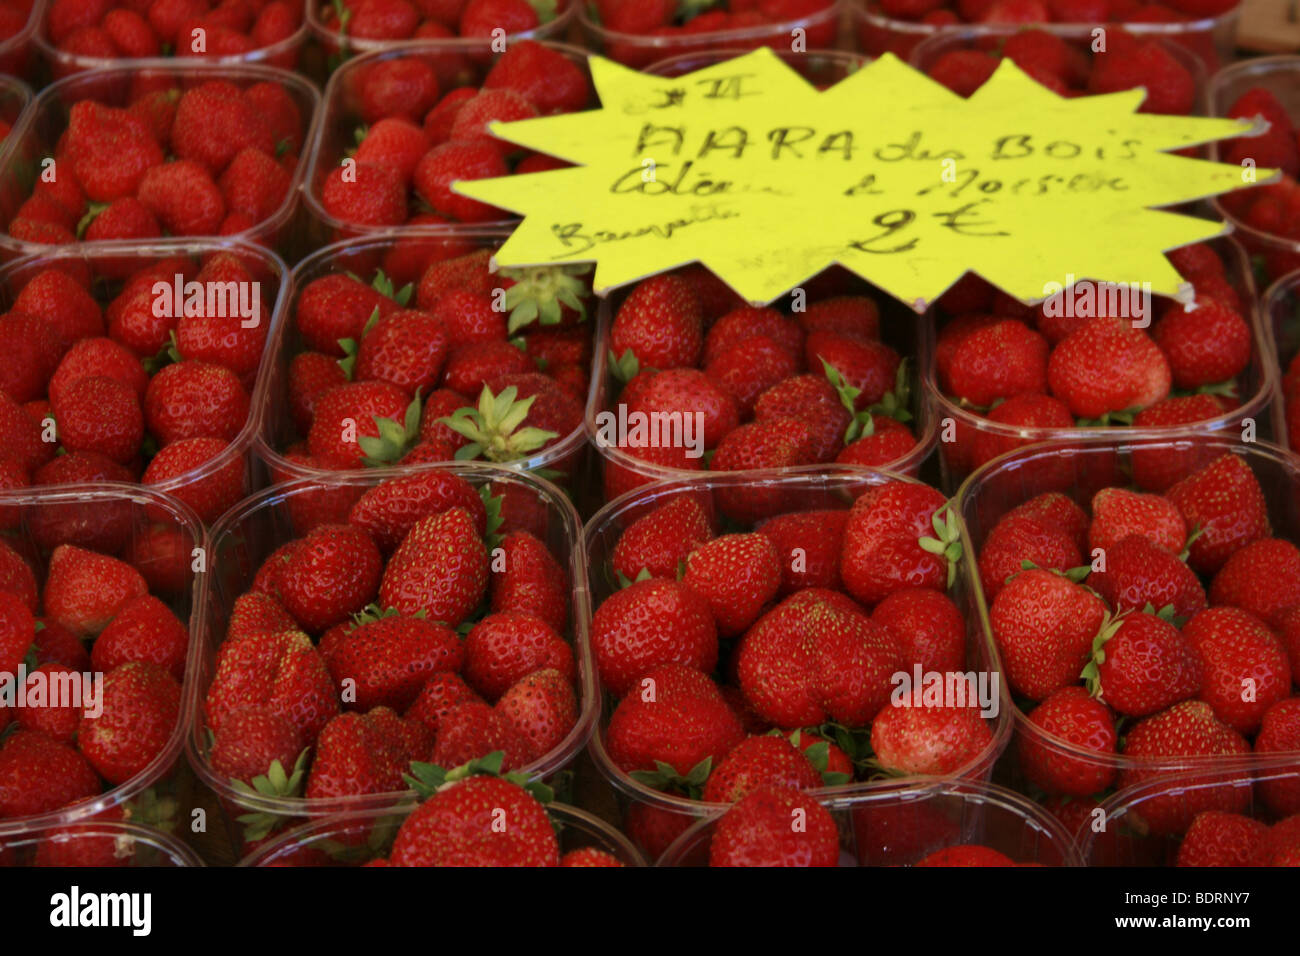 Punets of strawberries sold at the weekly market in Lectoure, Gers Stock Photo